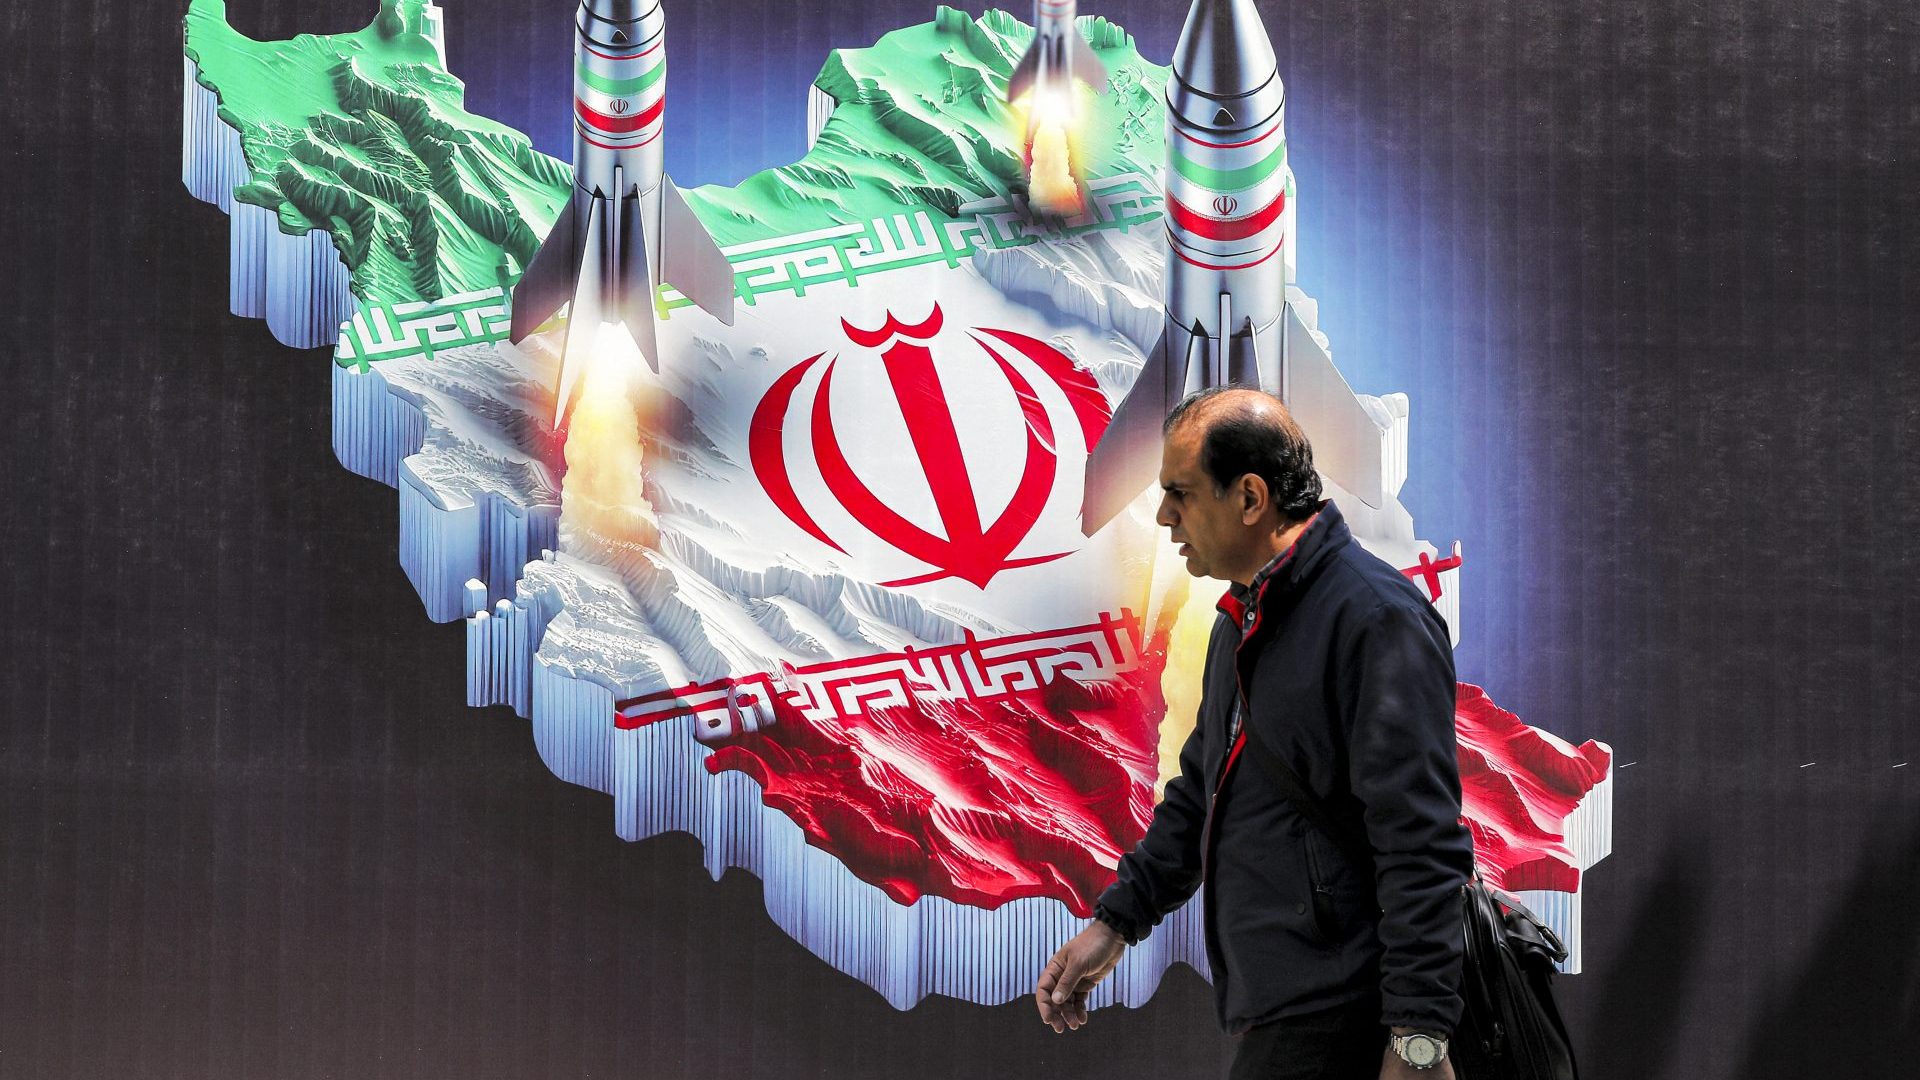 A banner in Tehran depicts missiles launching from a representation of the map of Iran, April 15, 2024. Photo: Atta Kenare/AFP/Getty